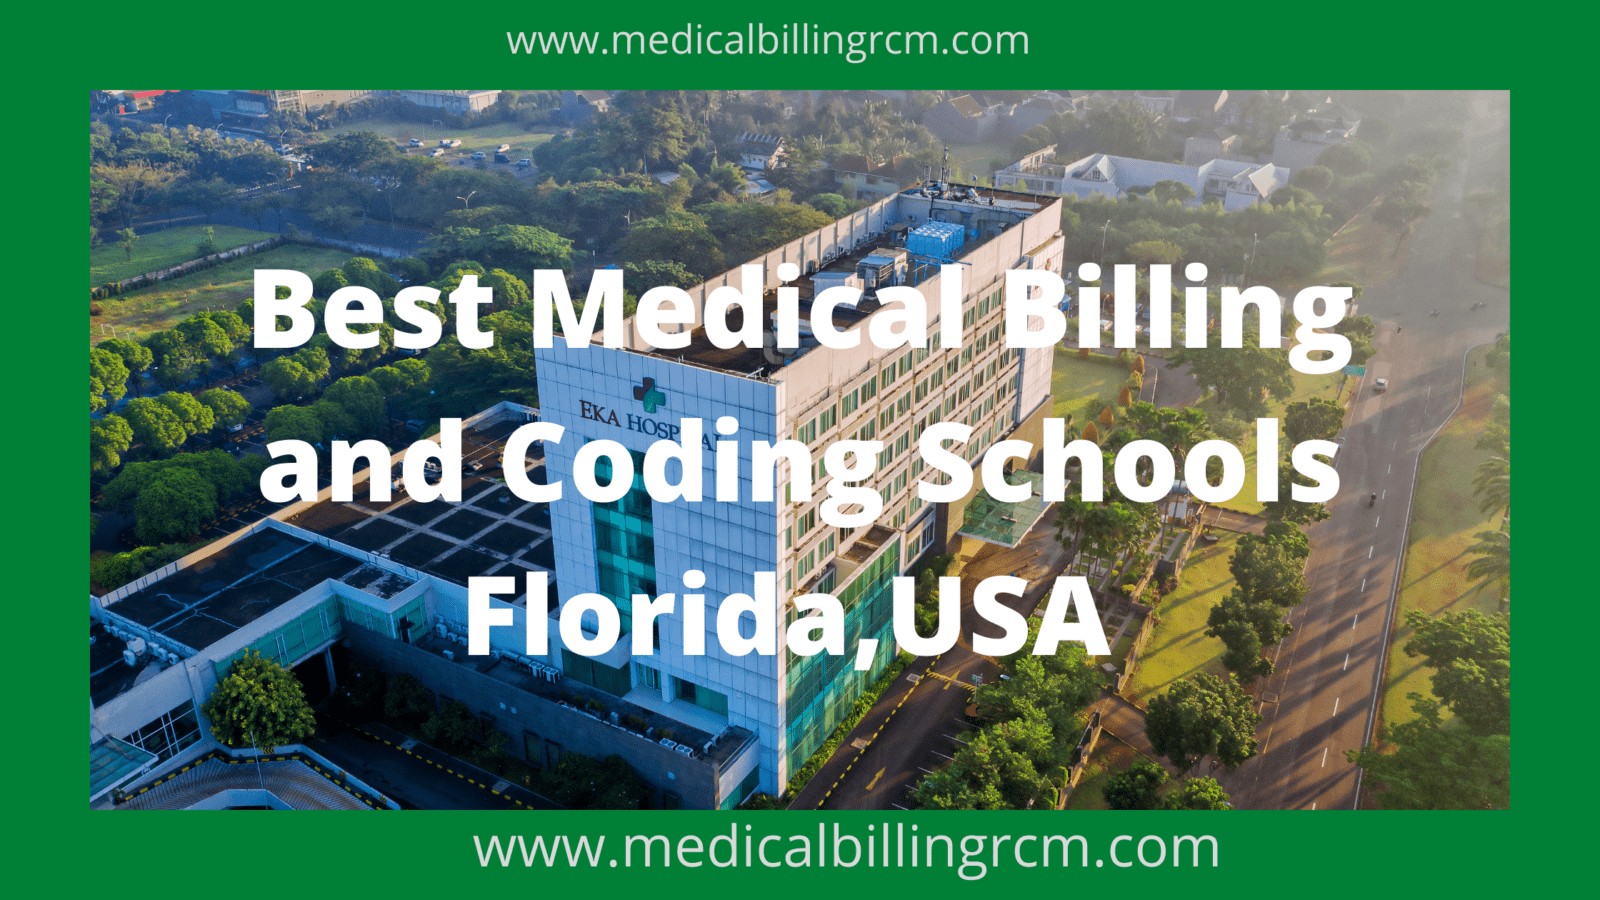 best accredited medical billing and coding schools in florida, USA